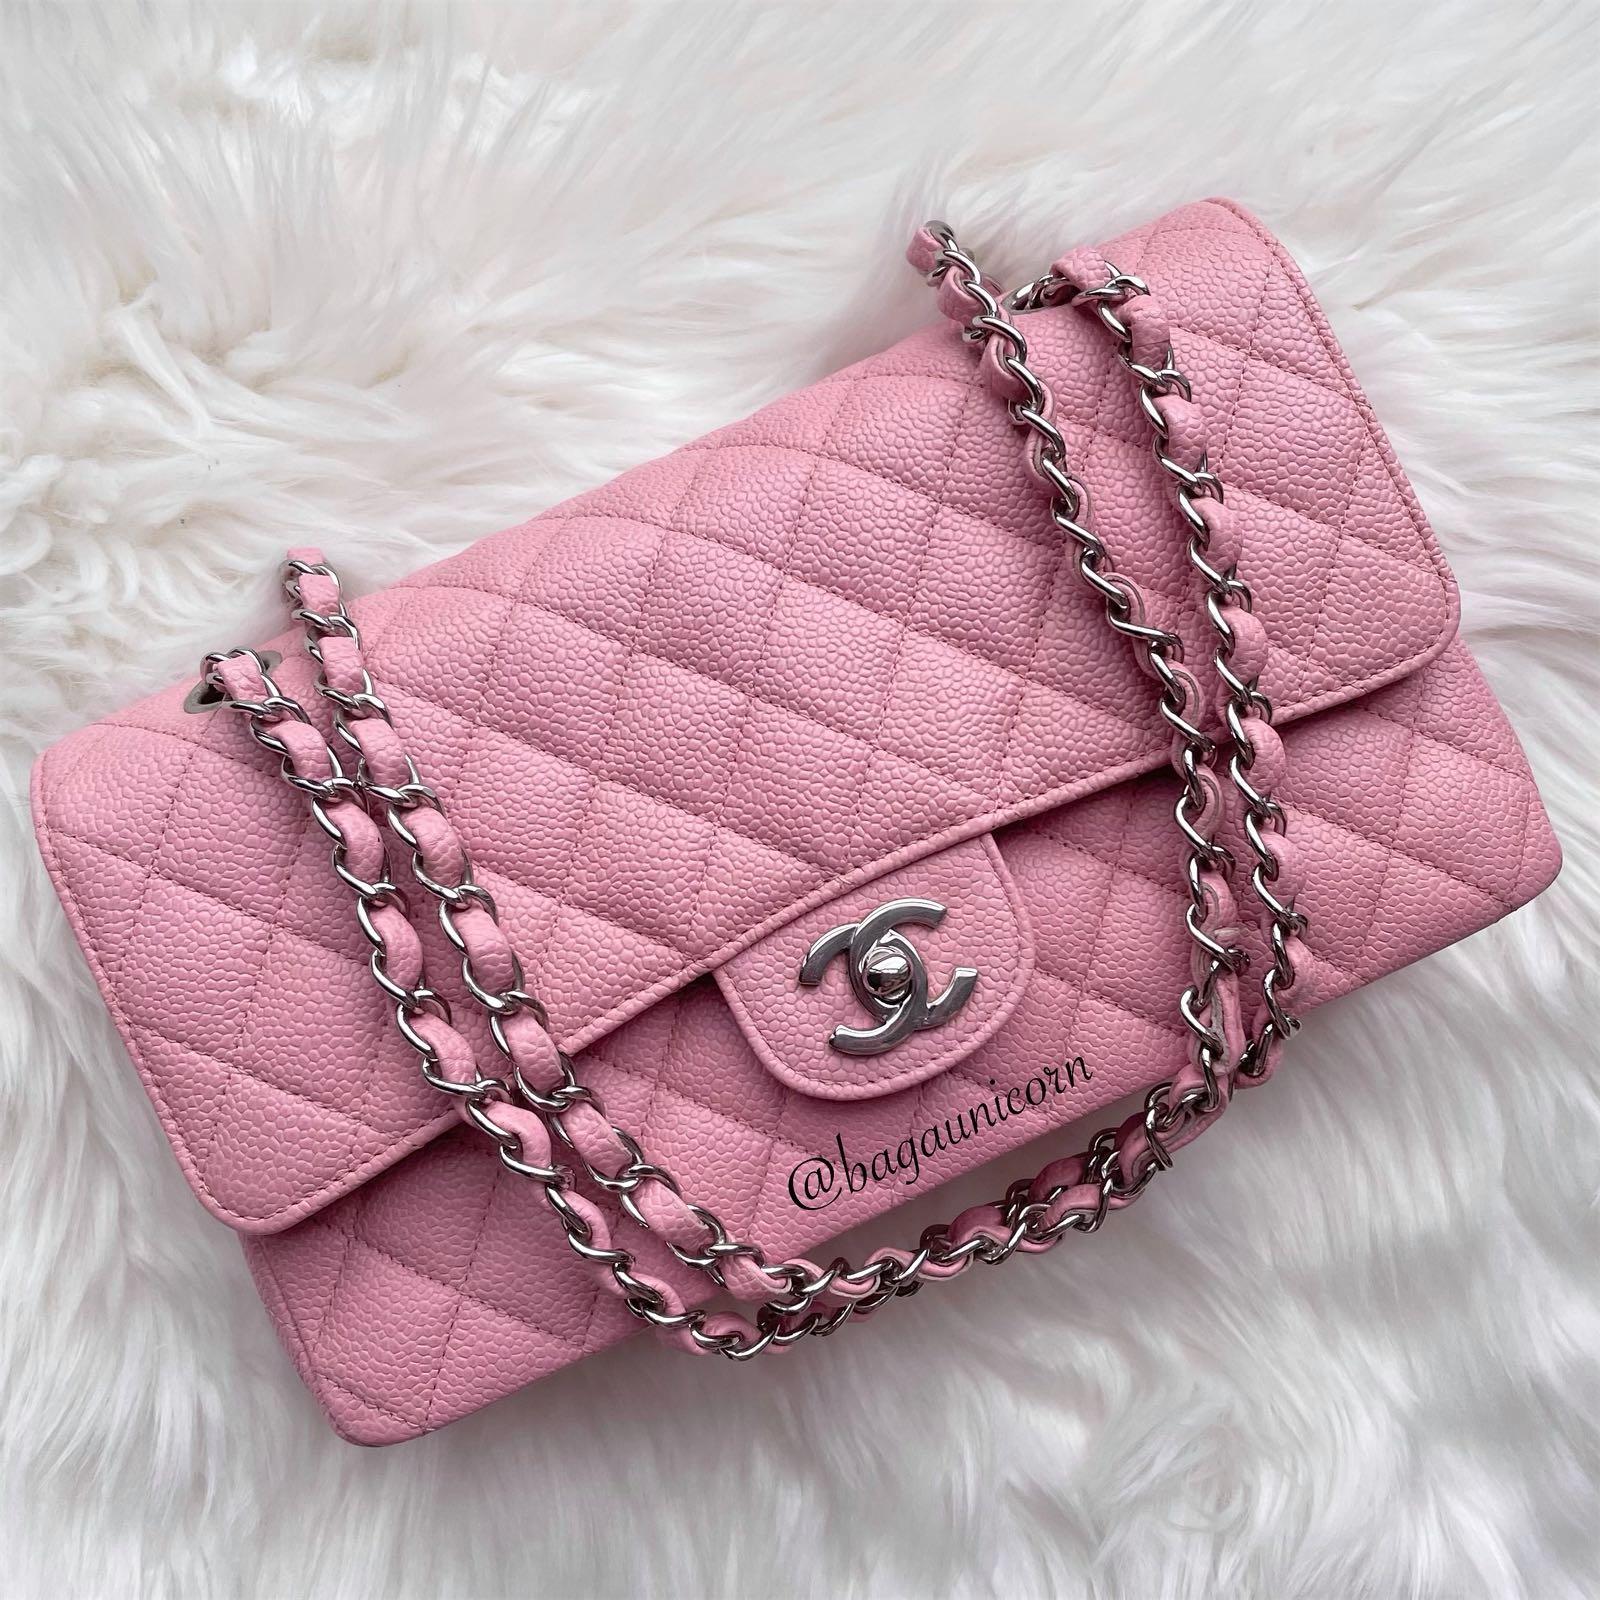 CHNL Pink Sling Bag Caviar Quilted Flapover Sling HandBag For